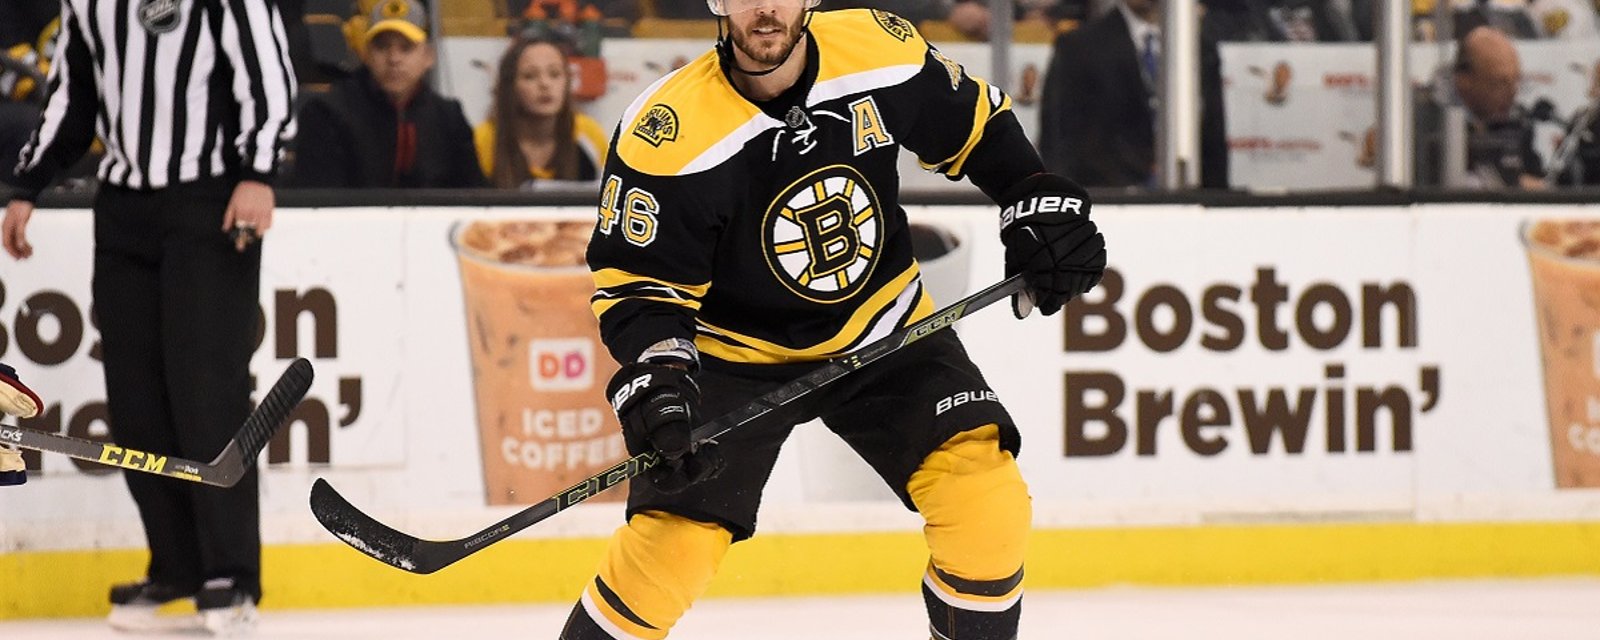 Bruins forward to miss World cup due to injury.